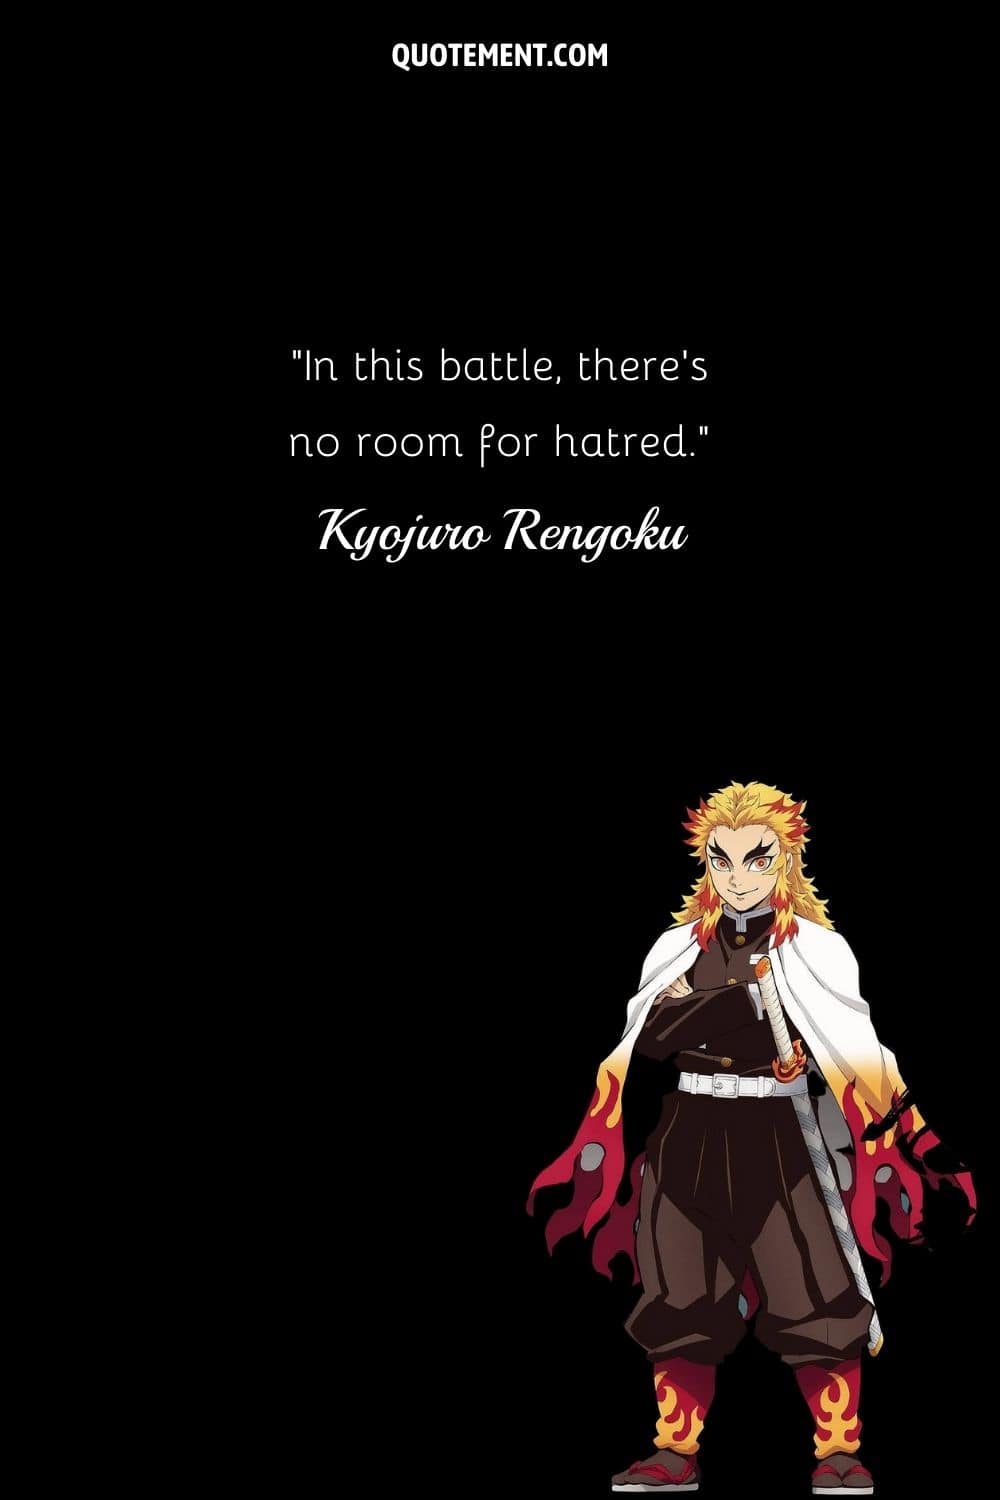 In this battle, there’s no room for hatred.